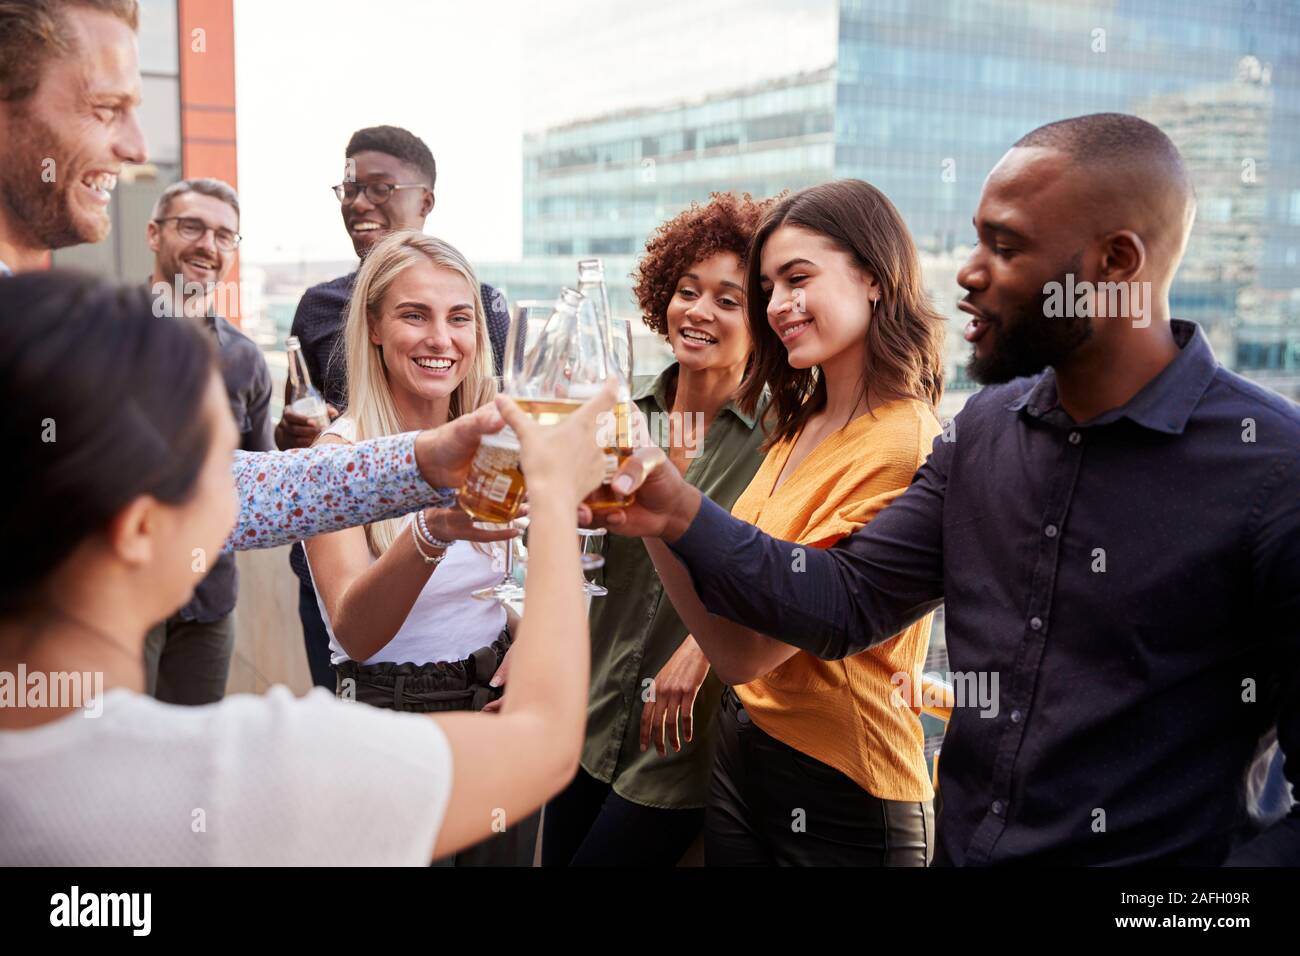 Creative business colleagues raising glasses and making a toast with drinks after work Stock Photo